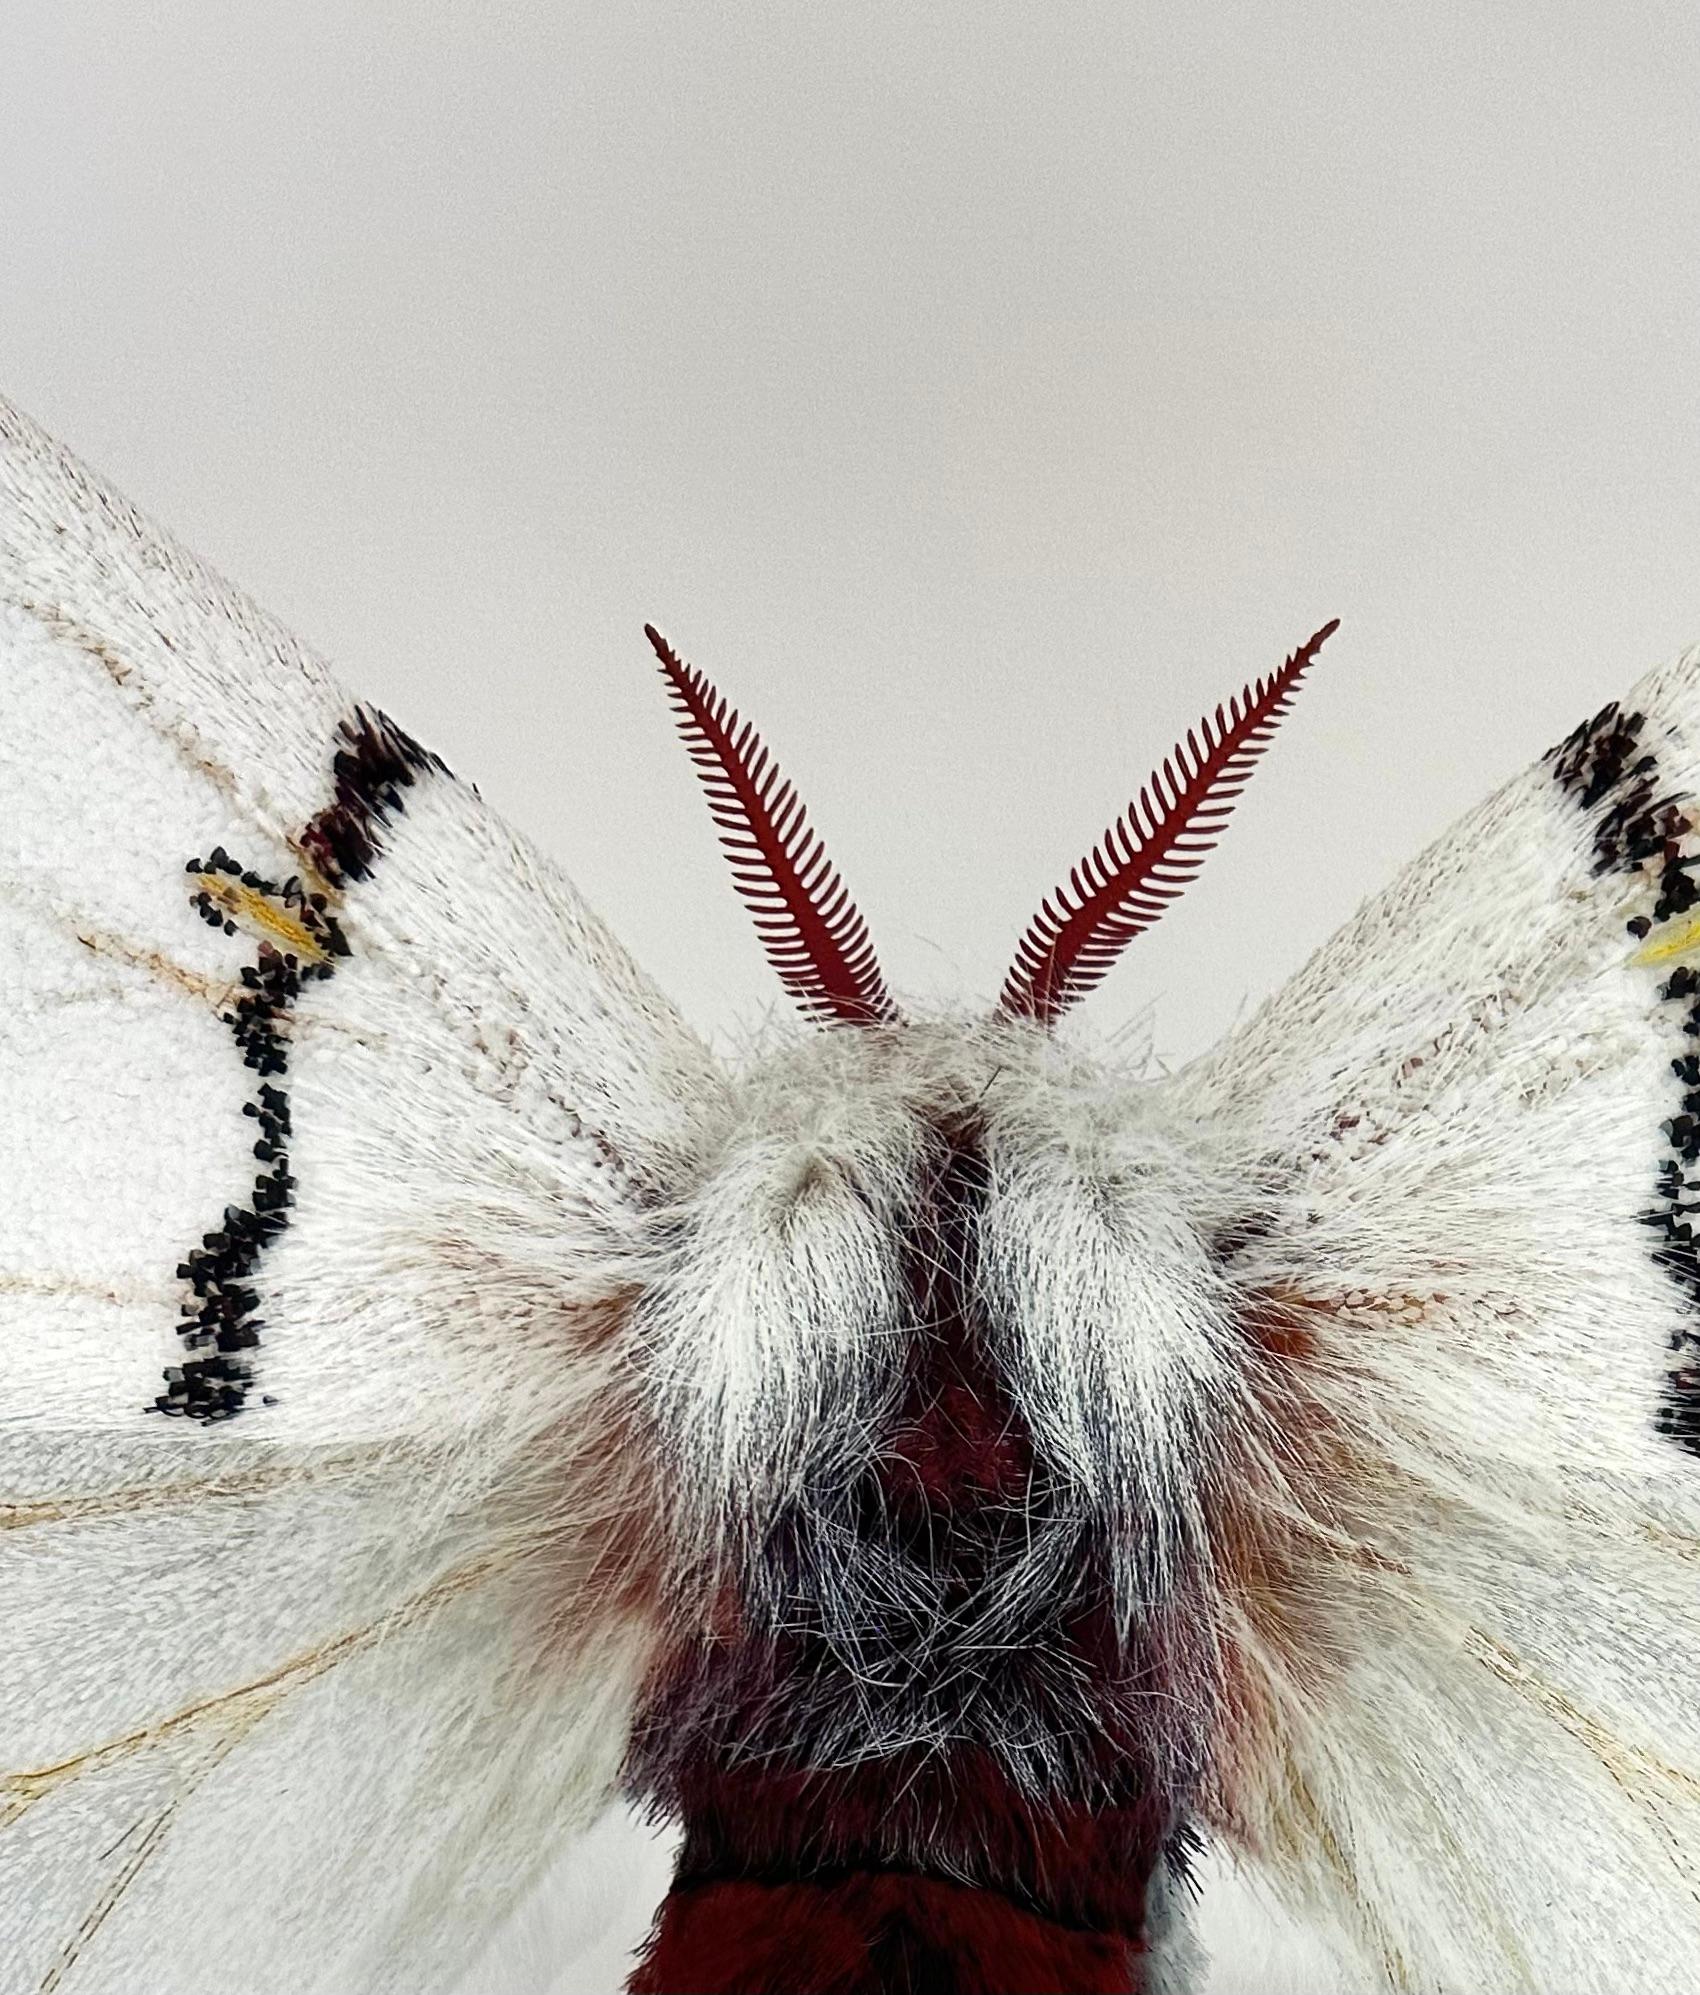 In this hyper-detailed archival pigment print on watercolor paper, a white moth with black stripes and yellow circular markings on its wings is dramatic against a solid white background. 

Price shown is the unframed price. Please inquire with the